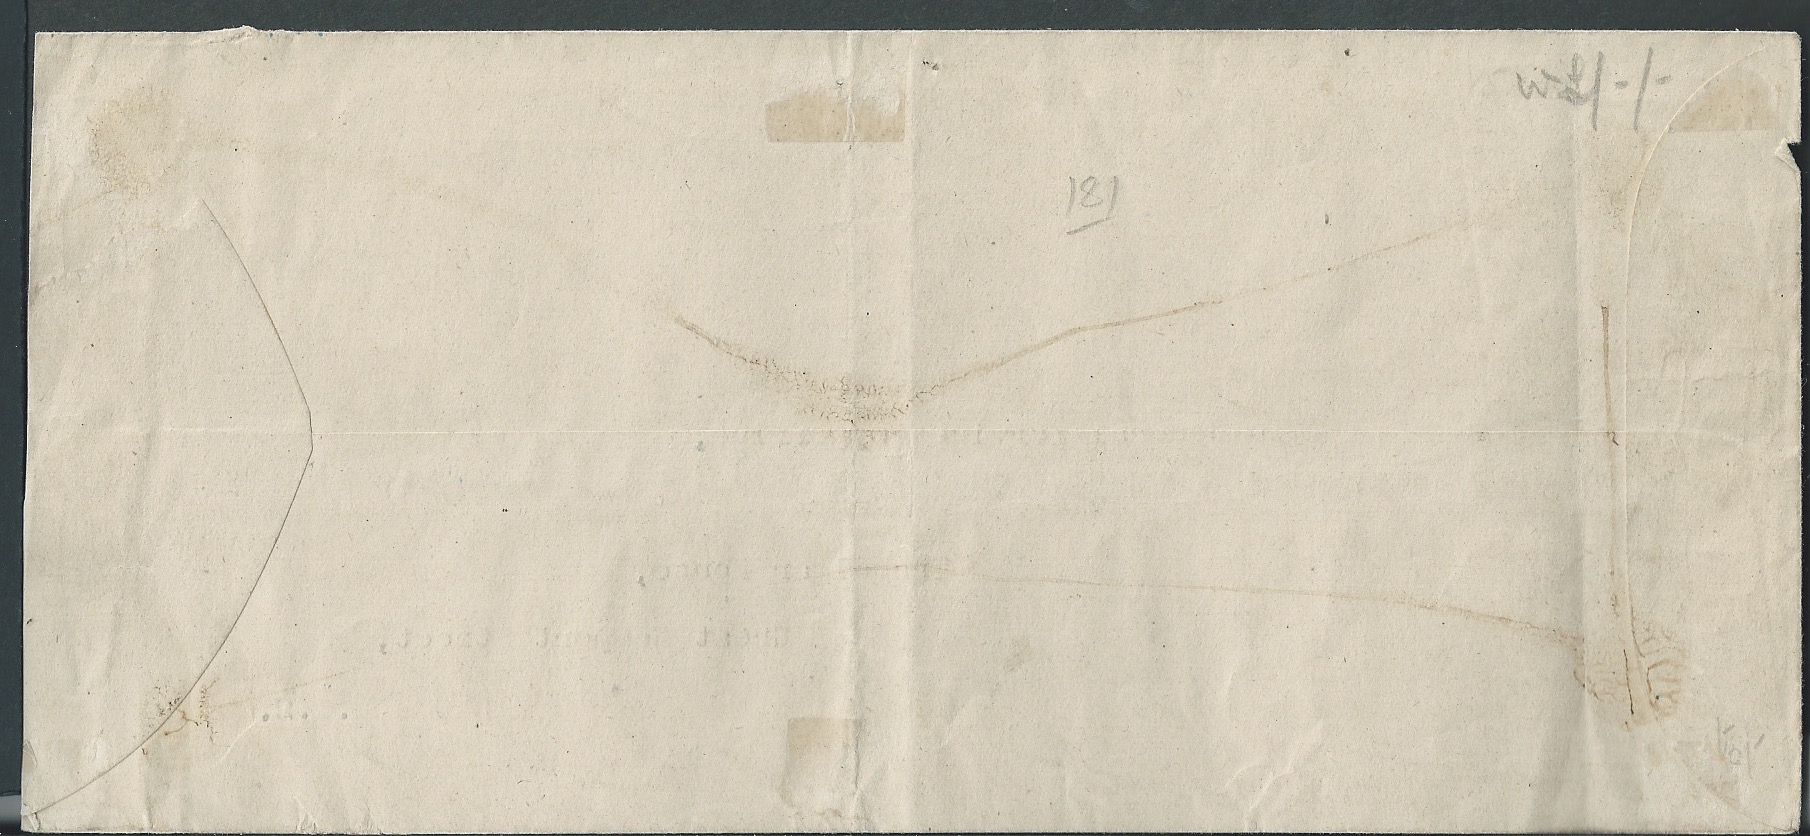 G.B. - Air Mails / World War One / France 1919 (July 28) Stampless O.H.M.S. cover flown by R.A.F., a - Image 2 of 2